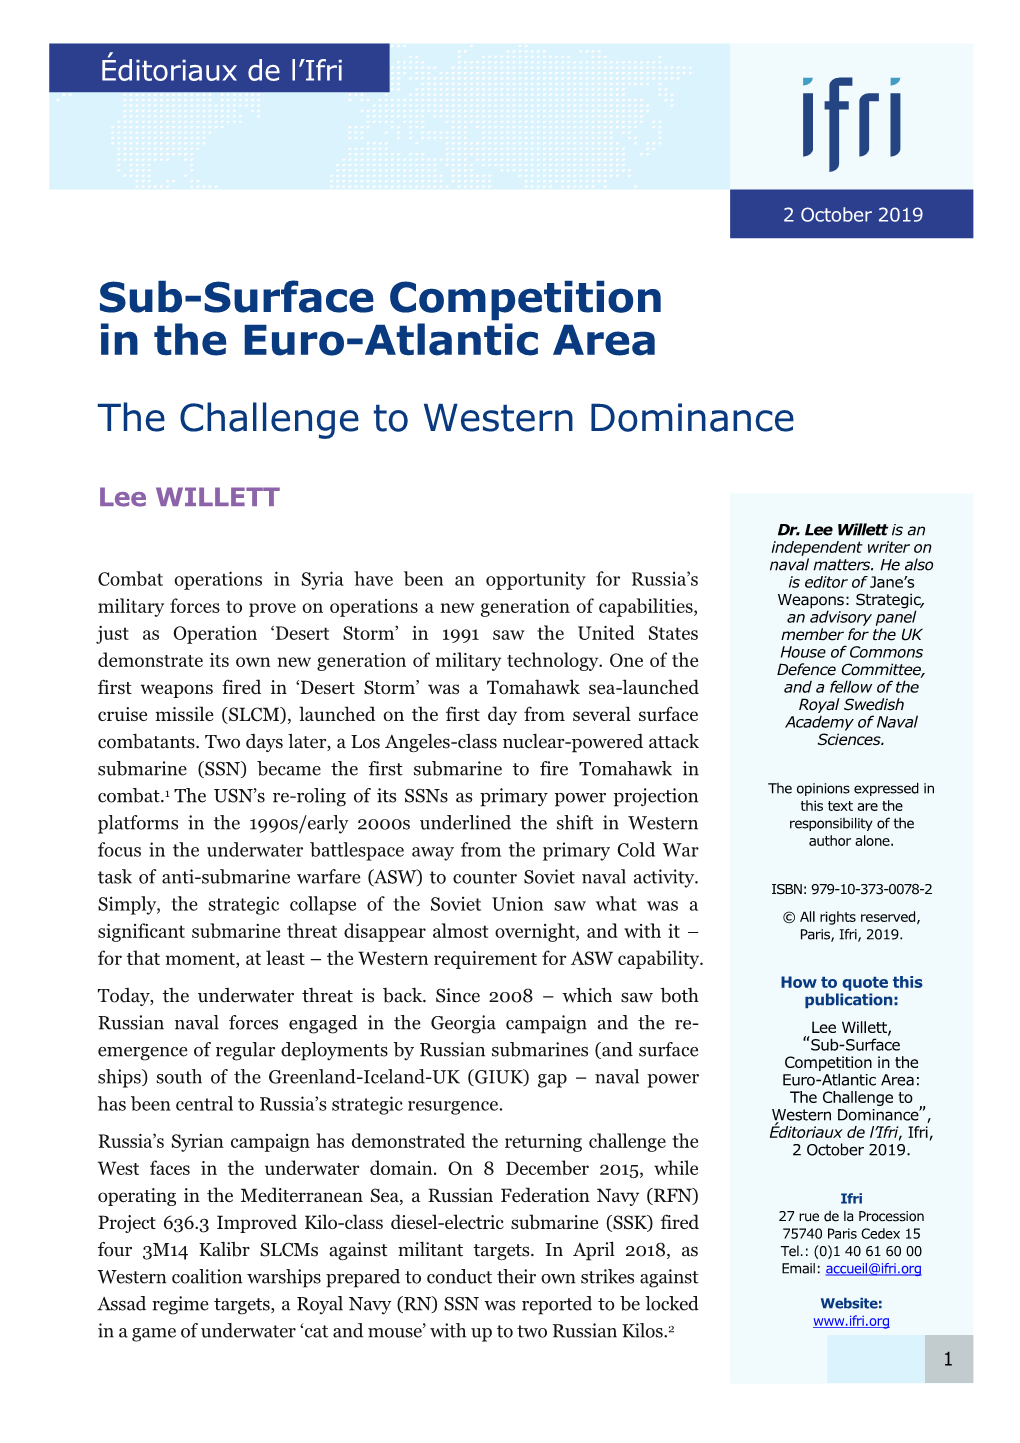 Sub-Surface Competition in the Euro-Atlantic Area: the Challenge